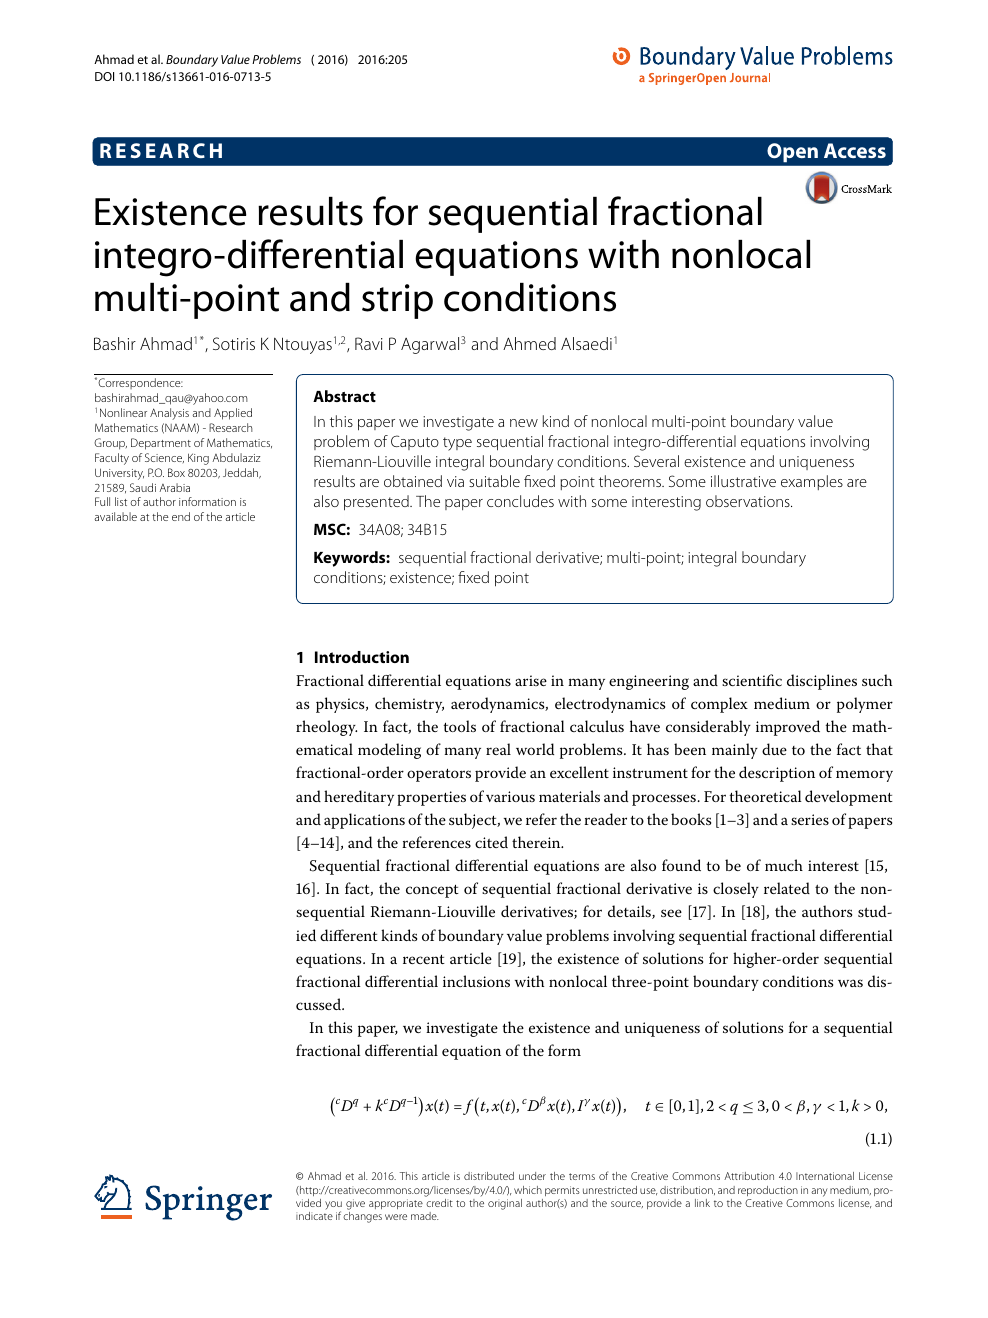 Existence Results For Sequential Fractional Integro Differential Equations With Nonlocal Multi Point And Strip Conditions Topic Of Research Paper In Mathematics Download Scholarly Article Pdf And Read For Free On Cyberleninka Open Science